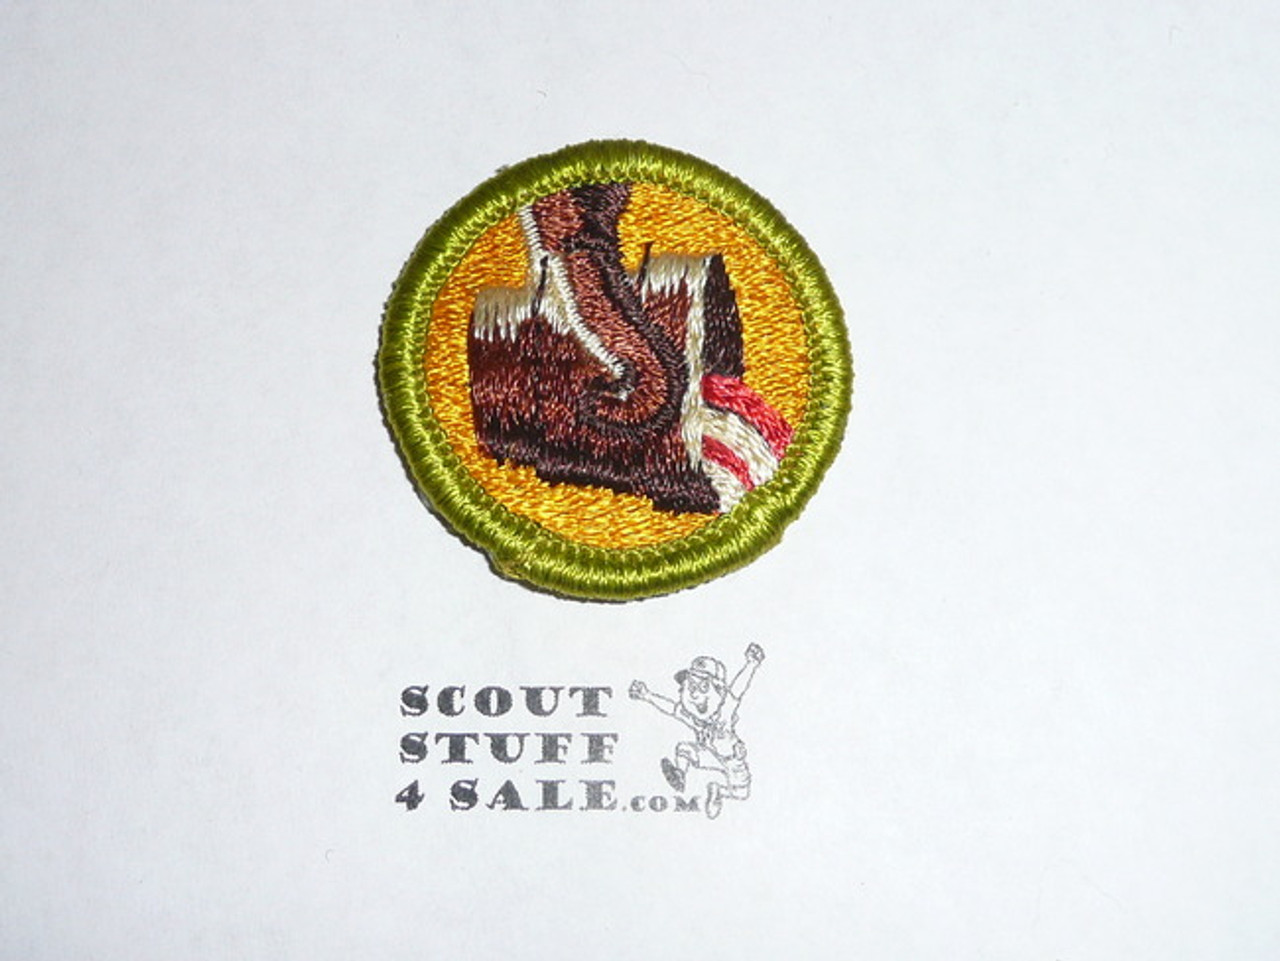 Metalurgy - Type H - Fully Embroidered Plastic Back Merit Badge (1972-2002)